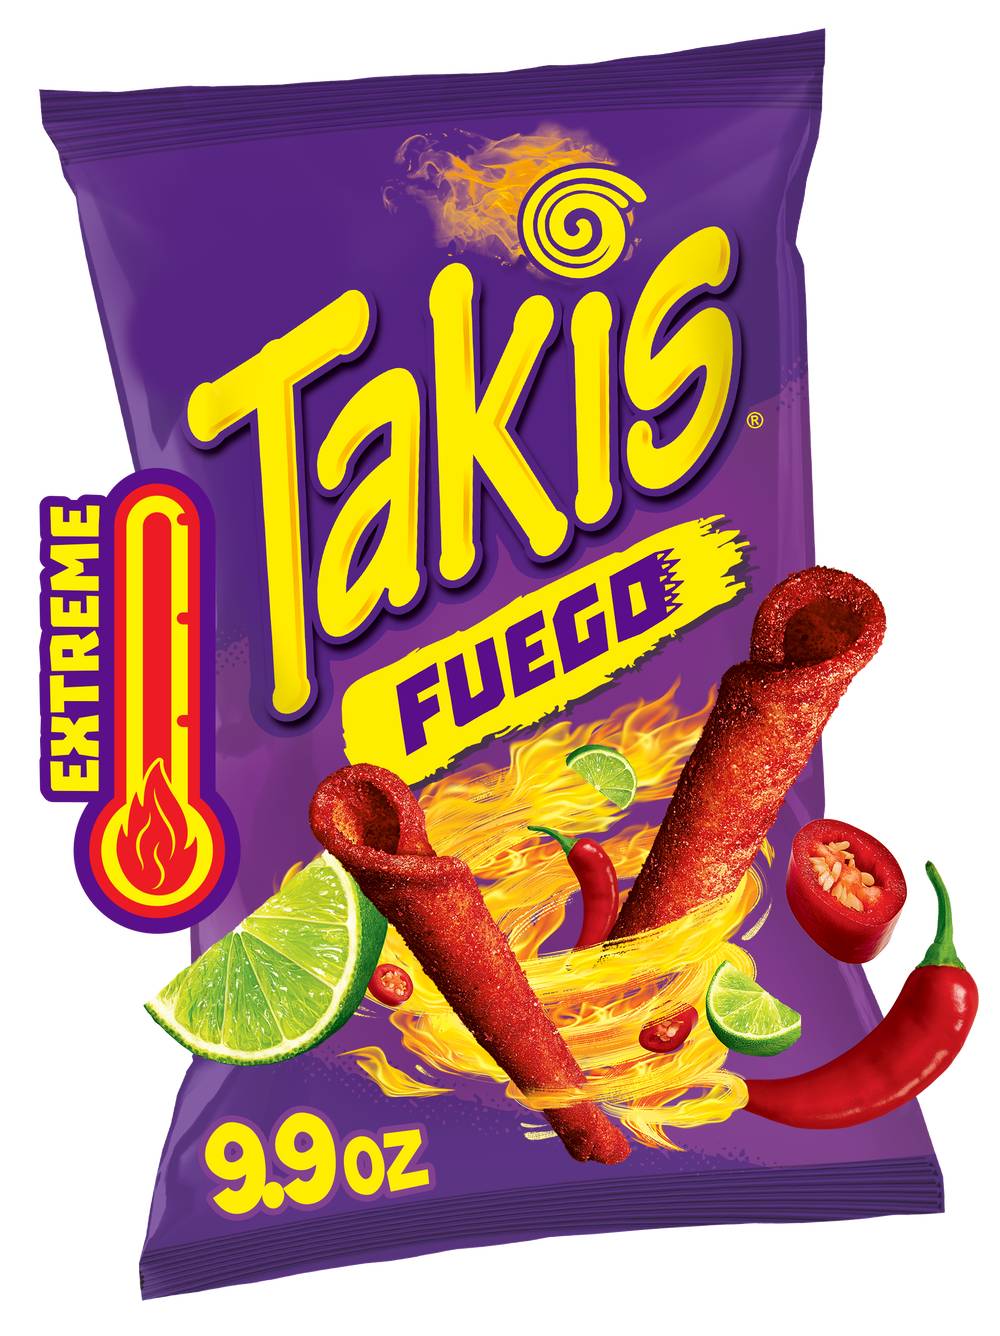 Takis Fuego Tortilla Chips (hot chili pepper-lime)